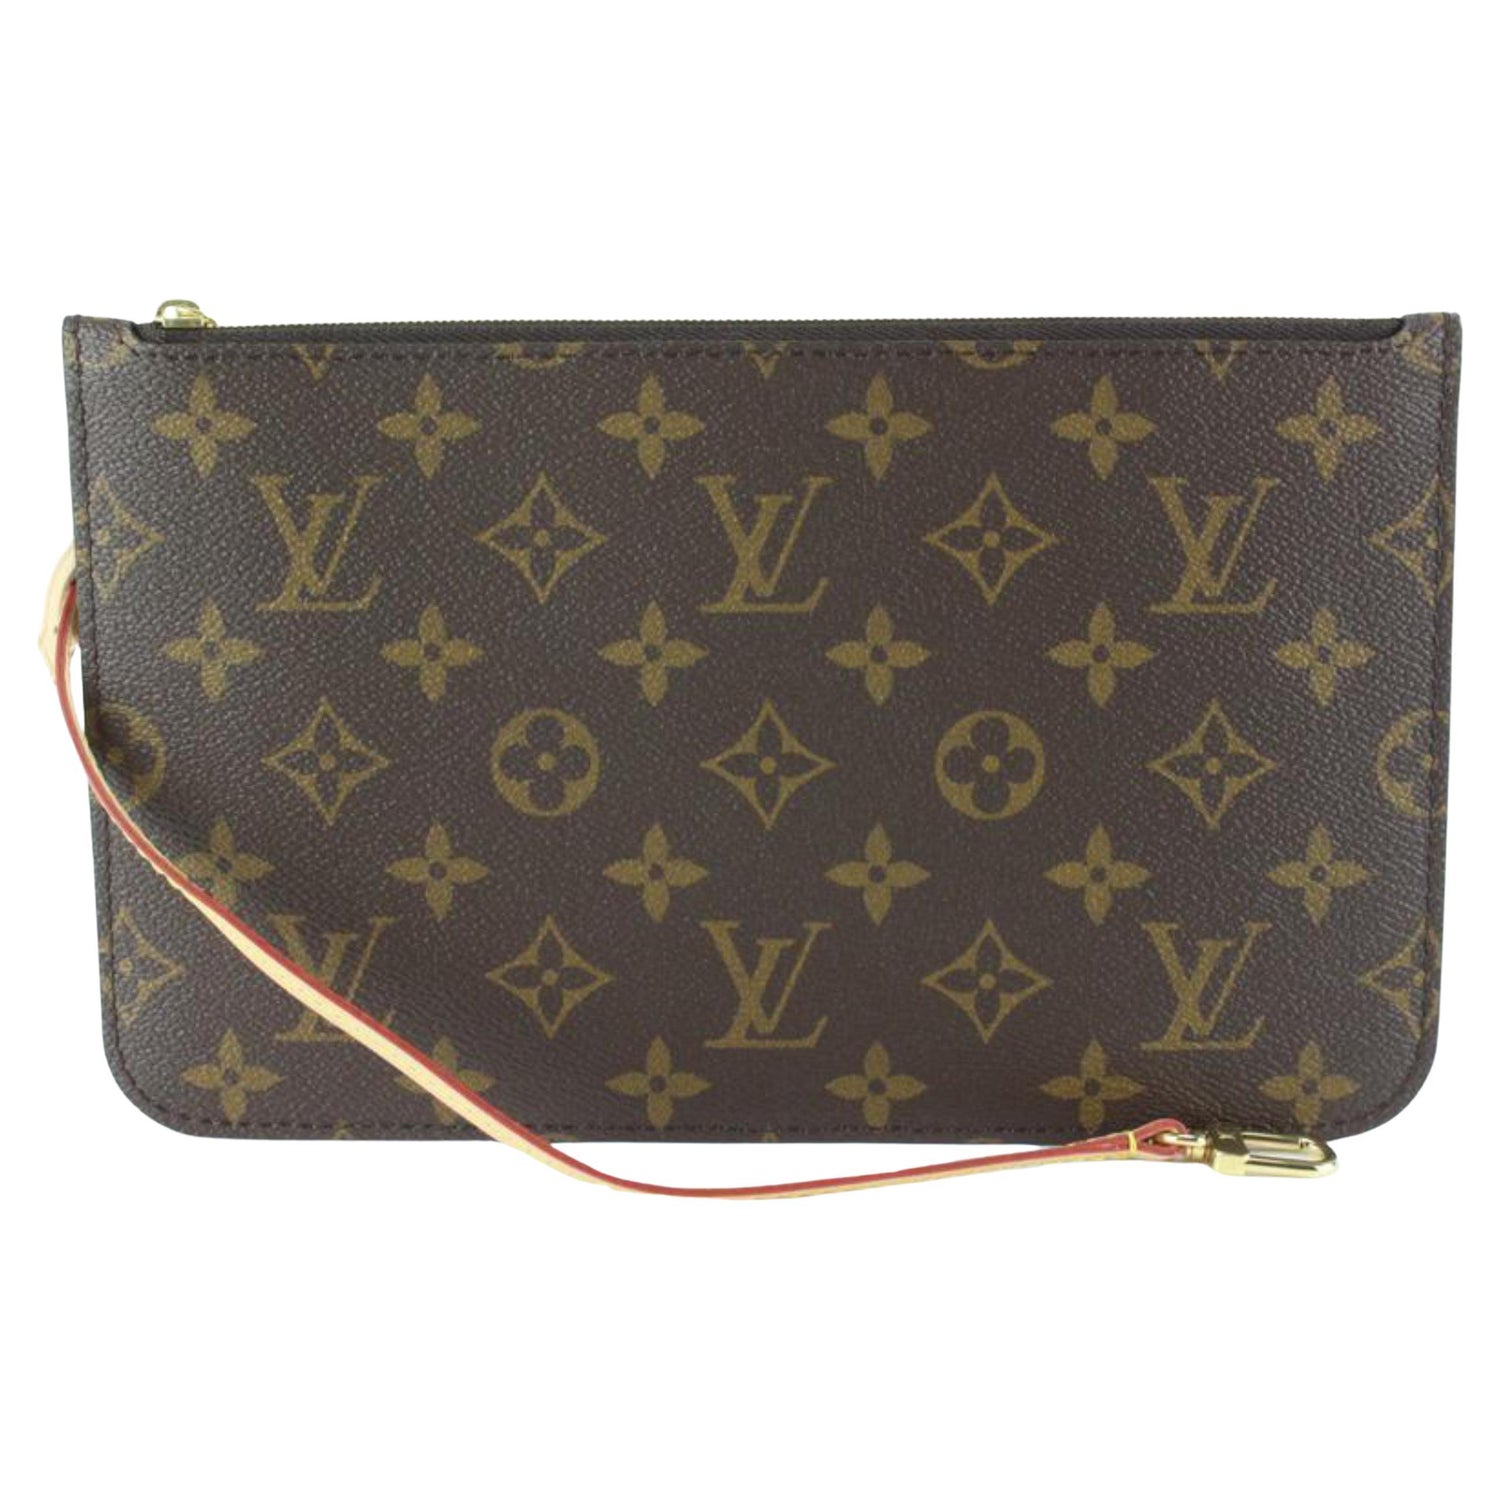 avenue sling bag lv price for Sale,Up To OFF 76%